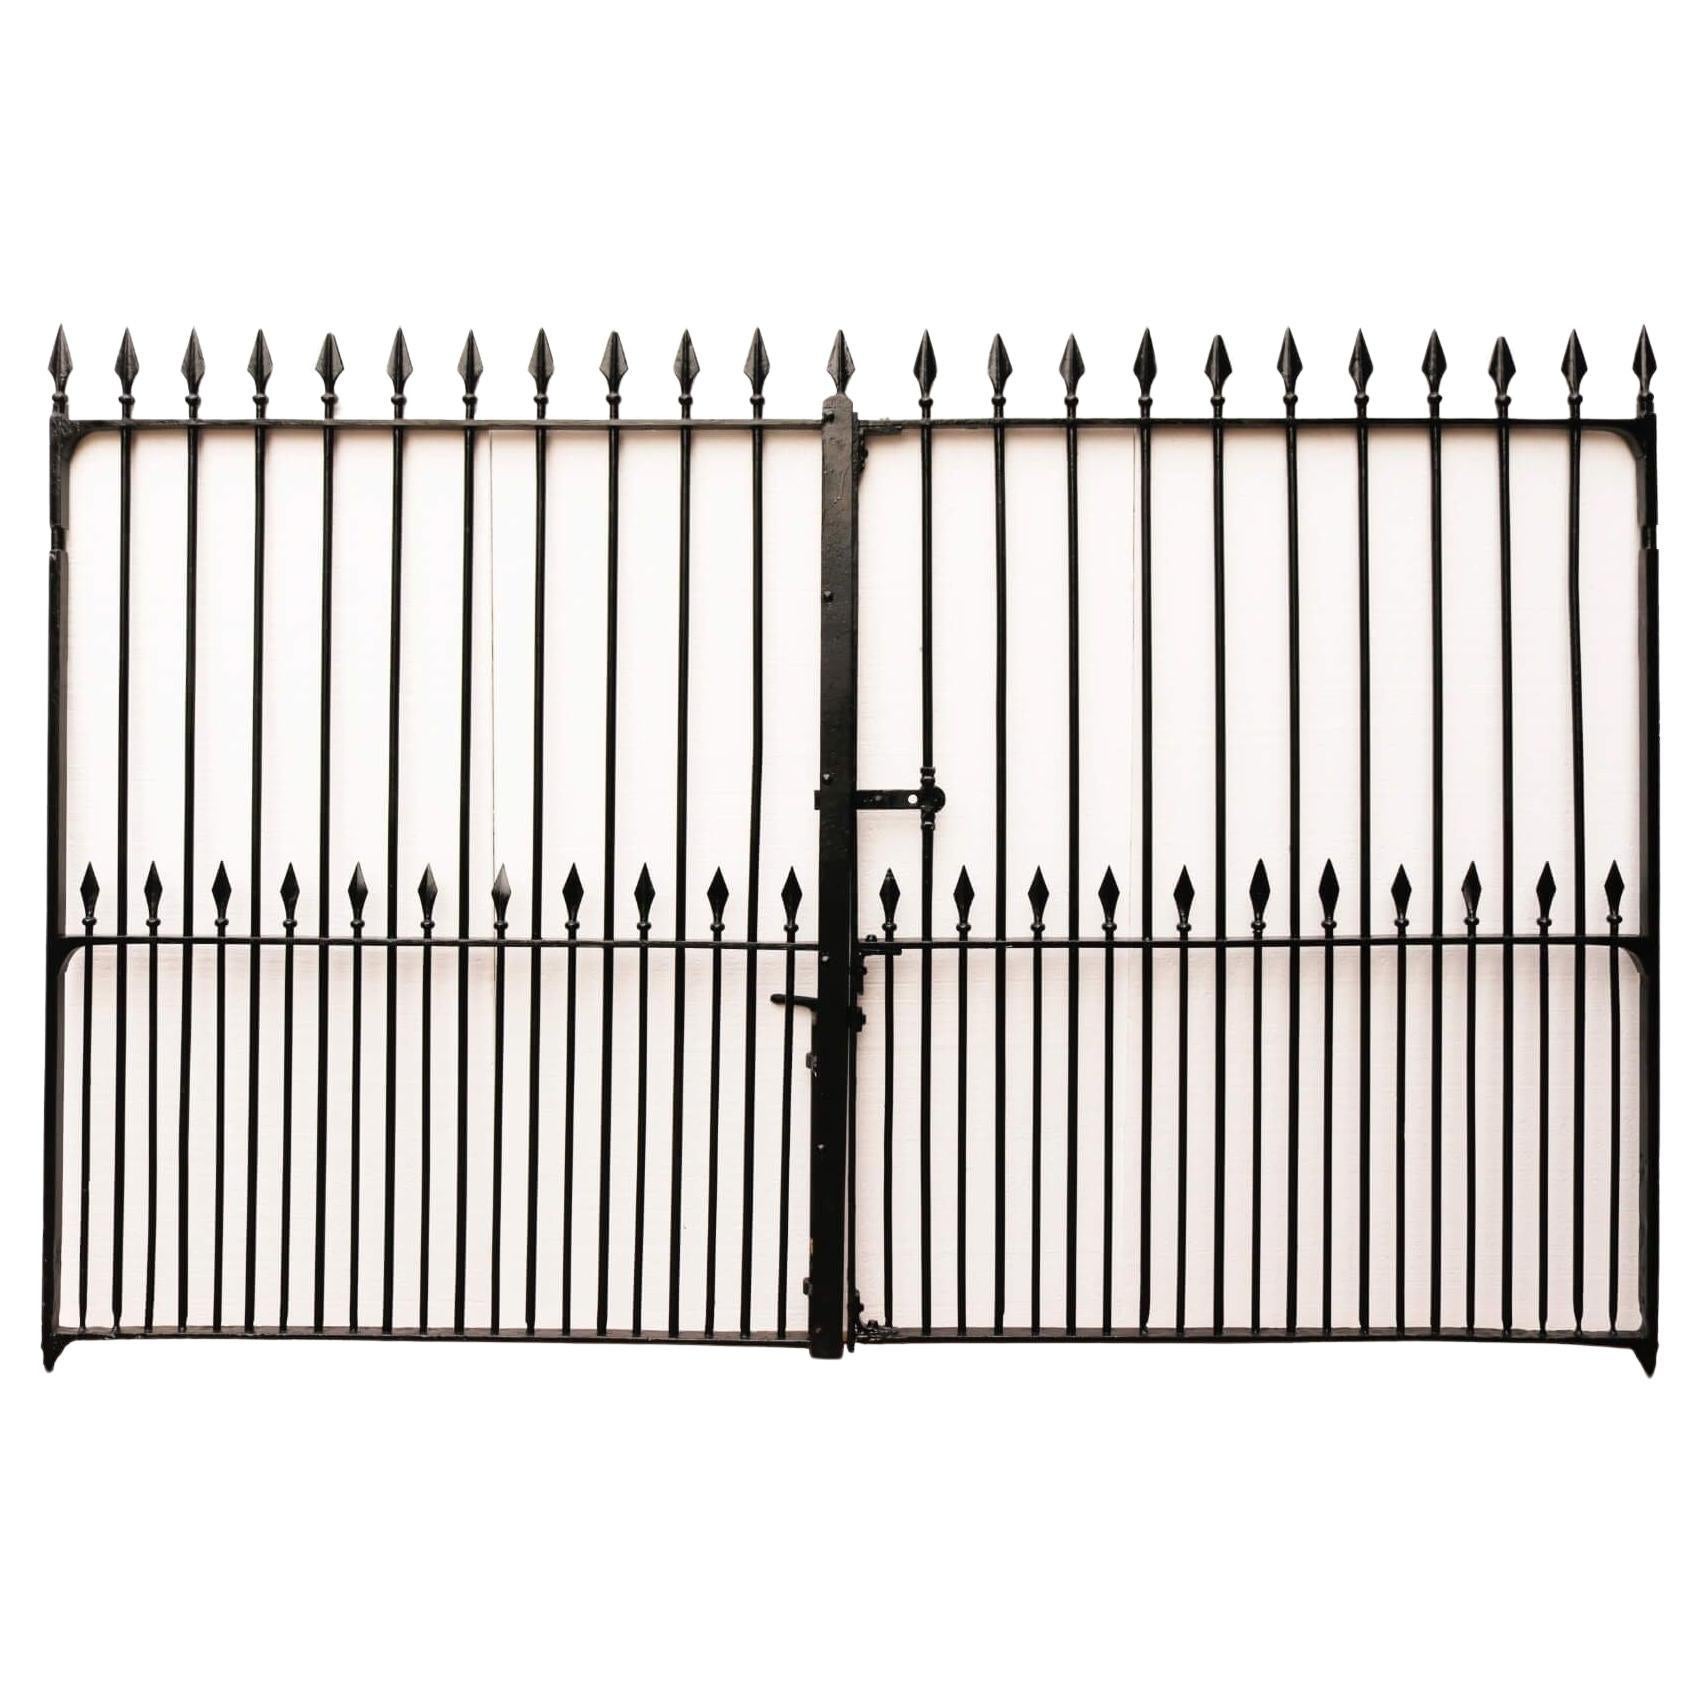 Pair of Wrought Iron Victorian Driveway Gates with Spears 308cm (10ft) For Sale